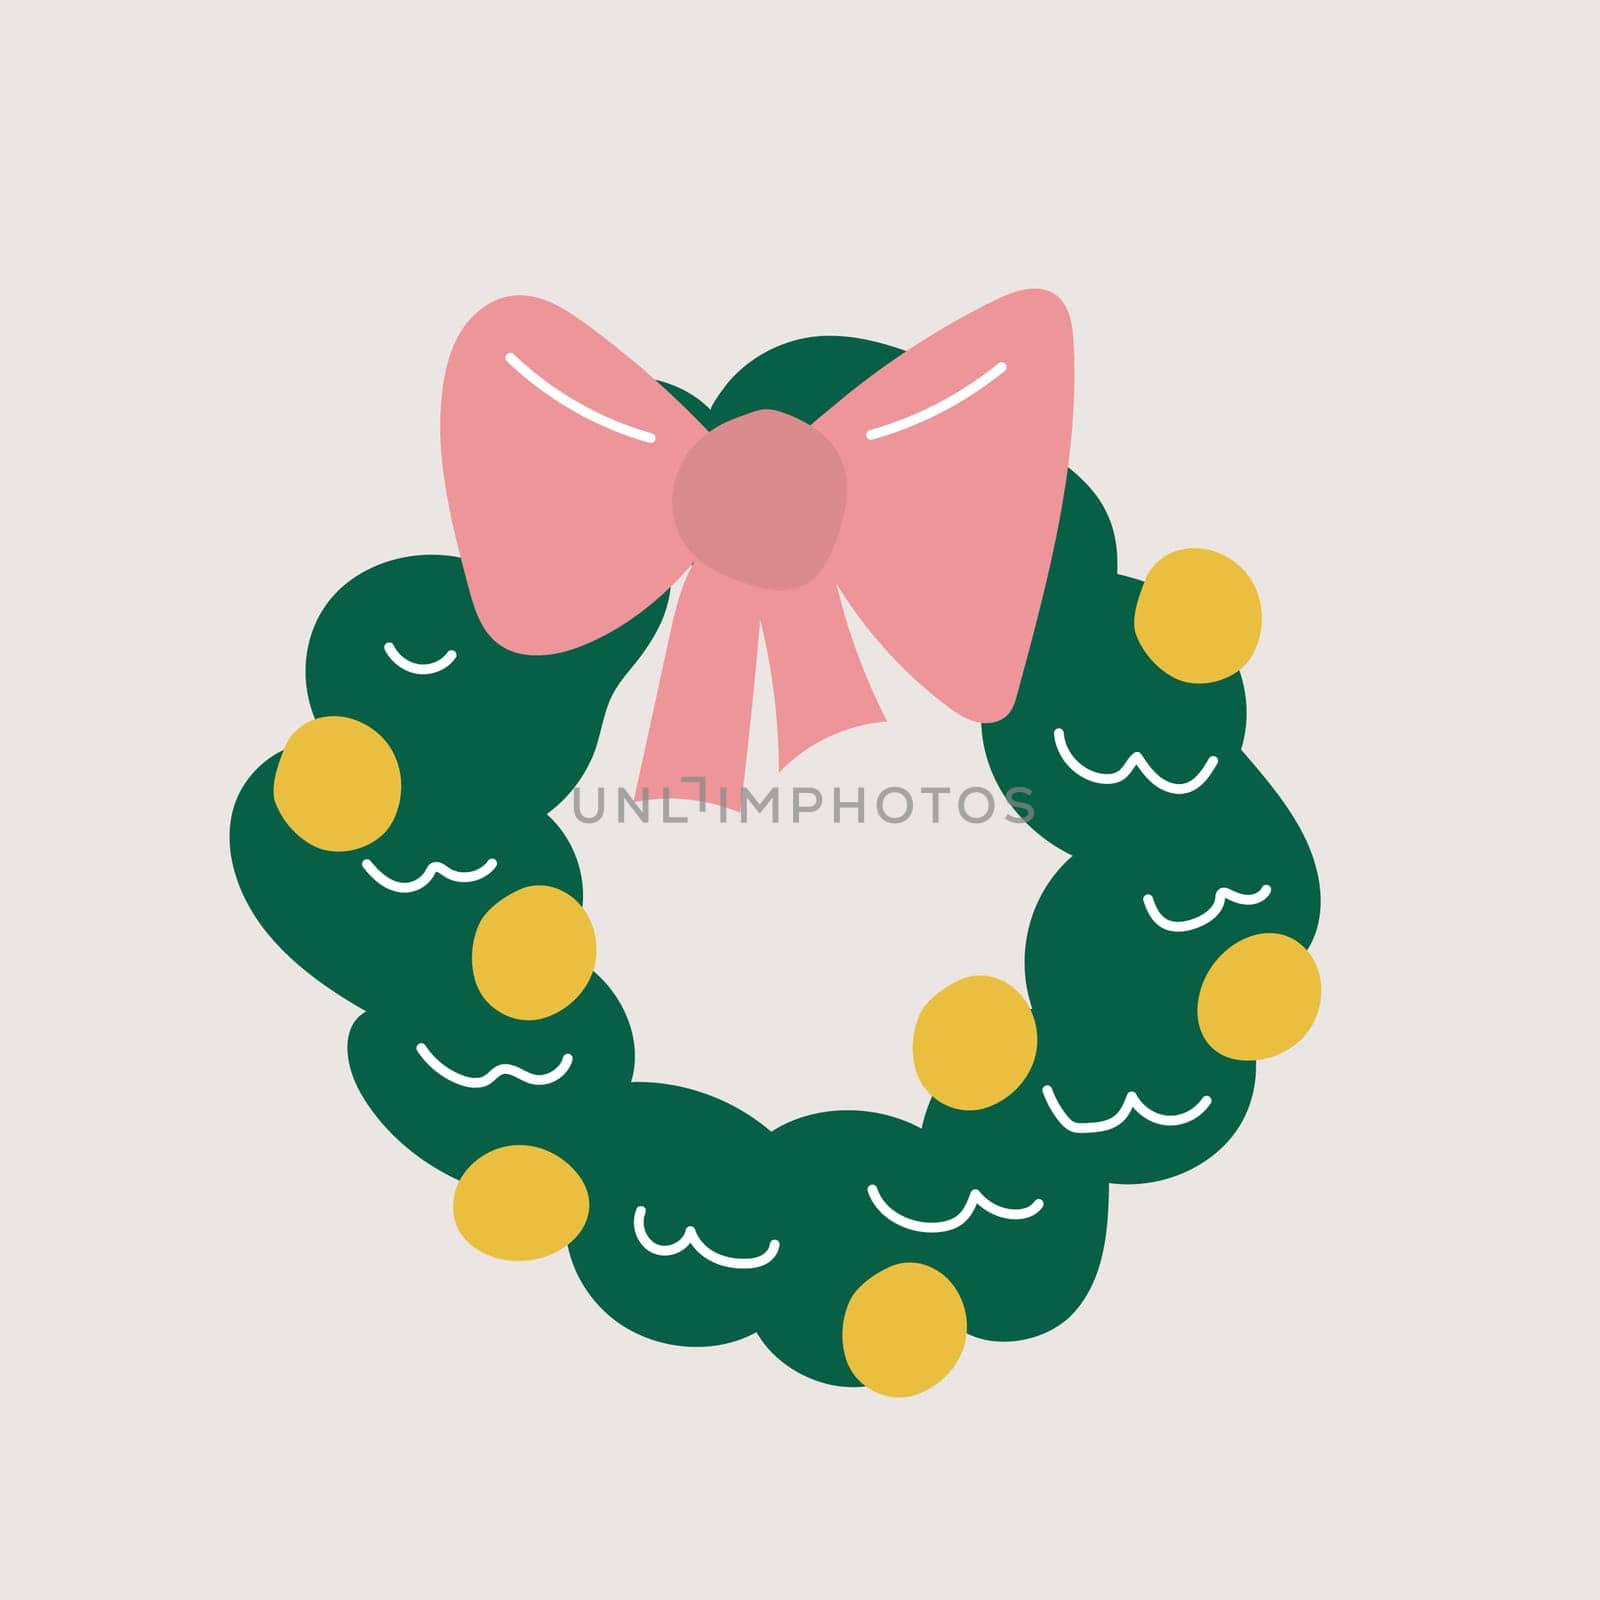 Hand drawn Christmas wreath doodle icon. Vector illustration isolated on grey background